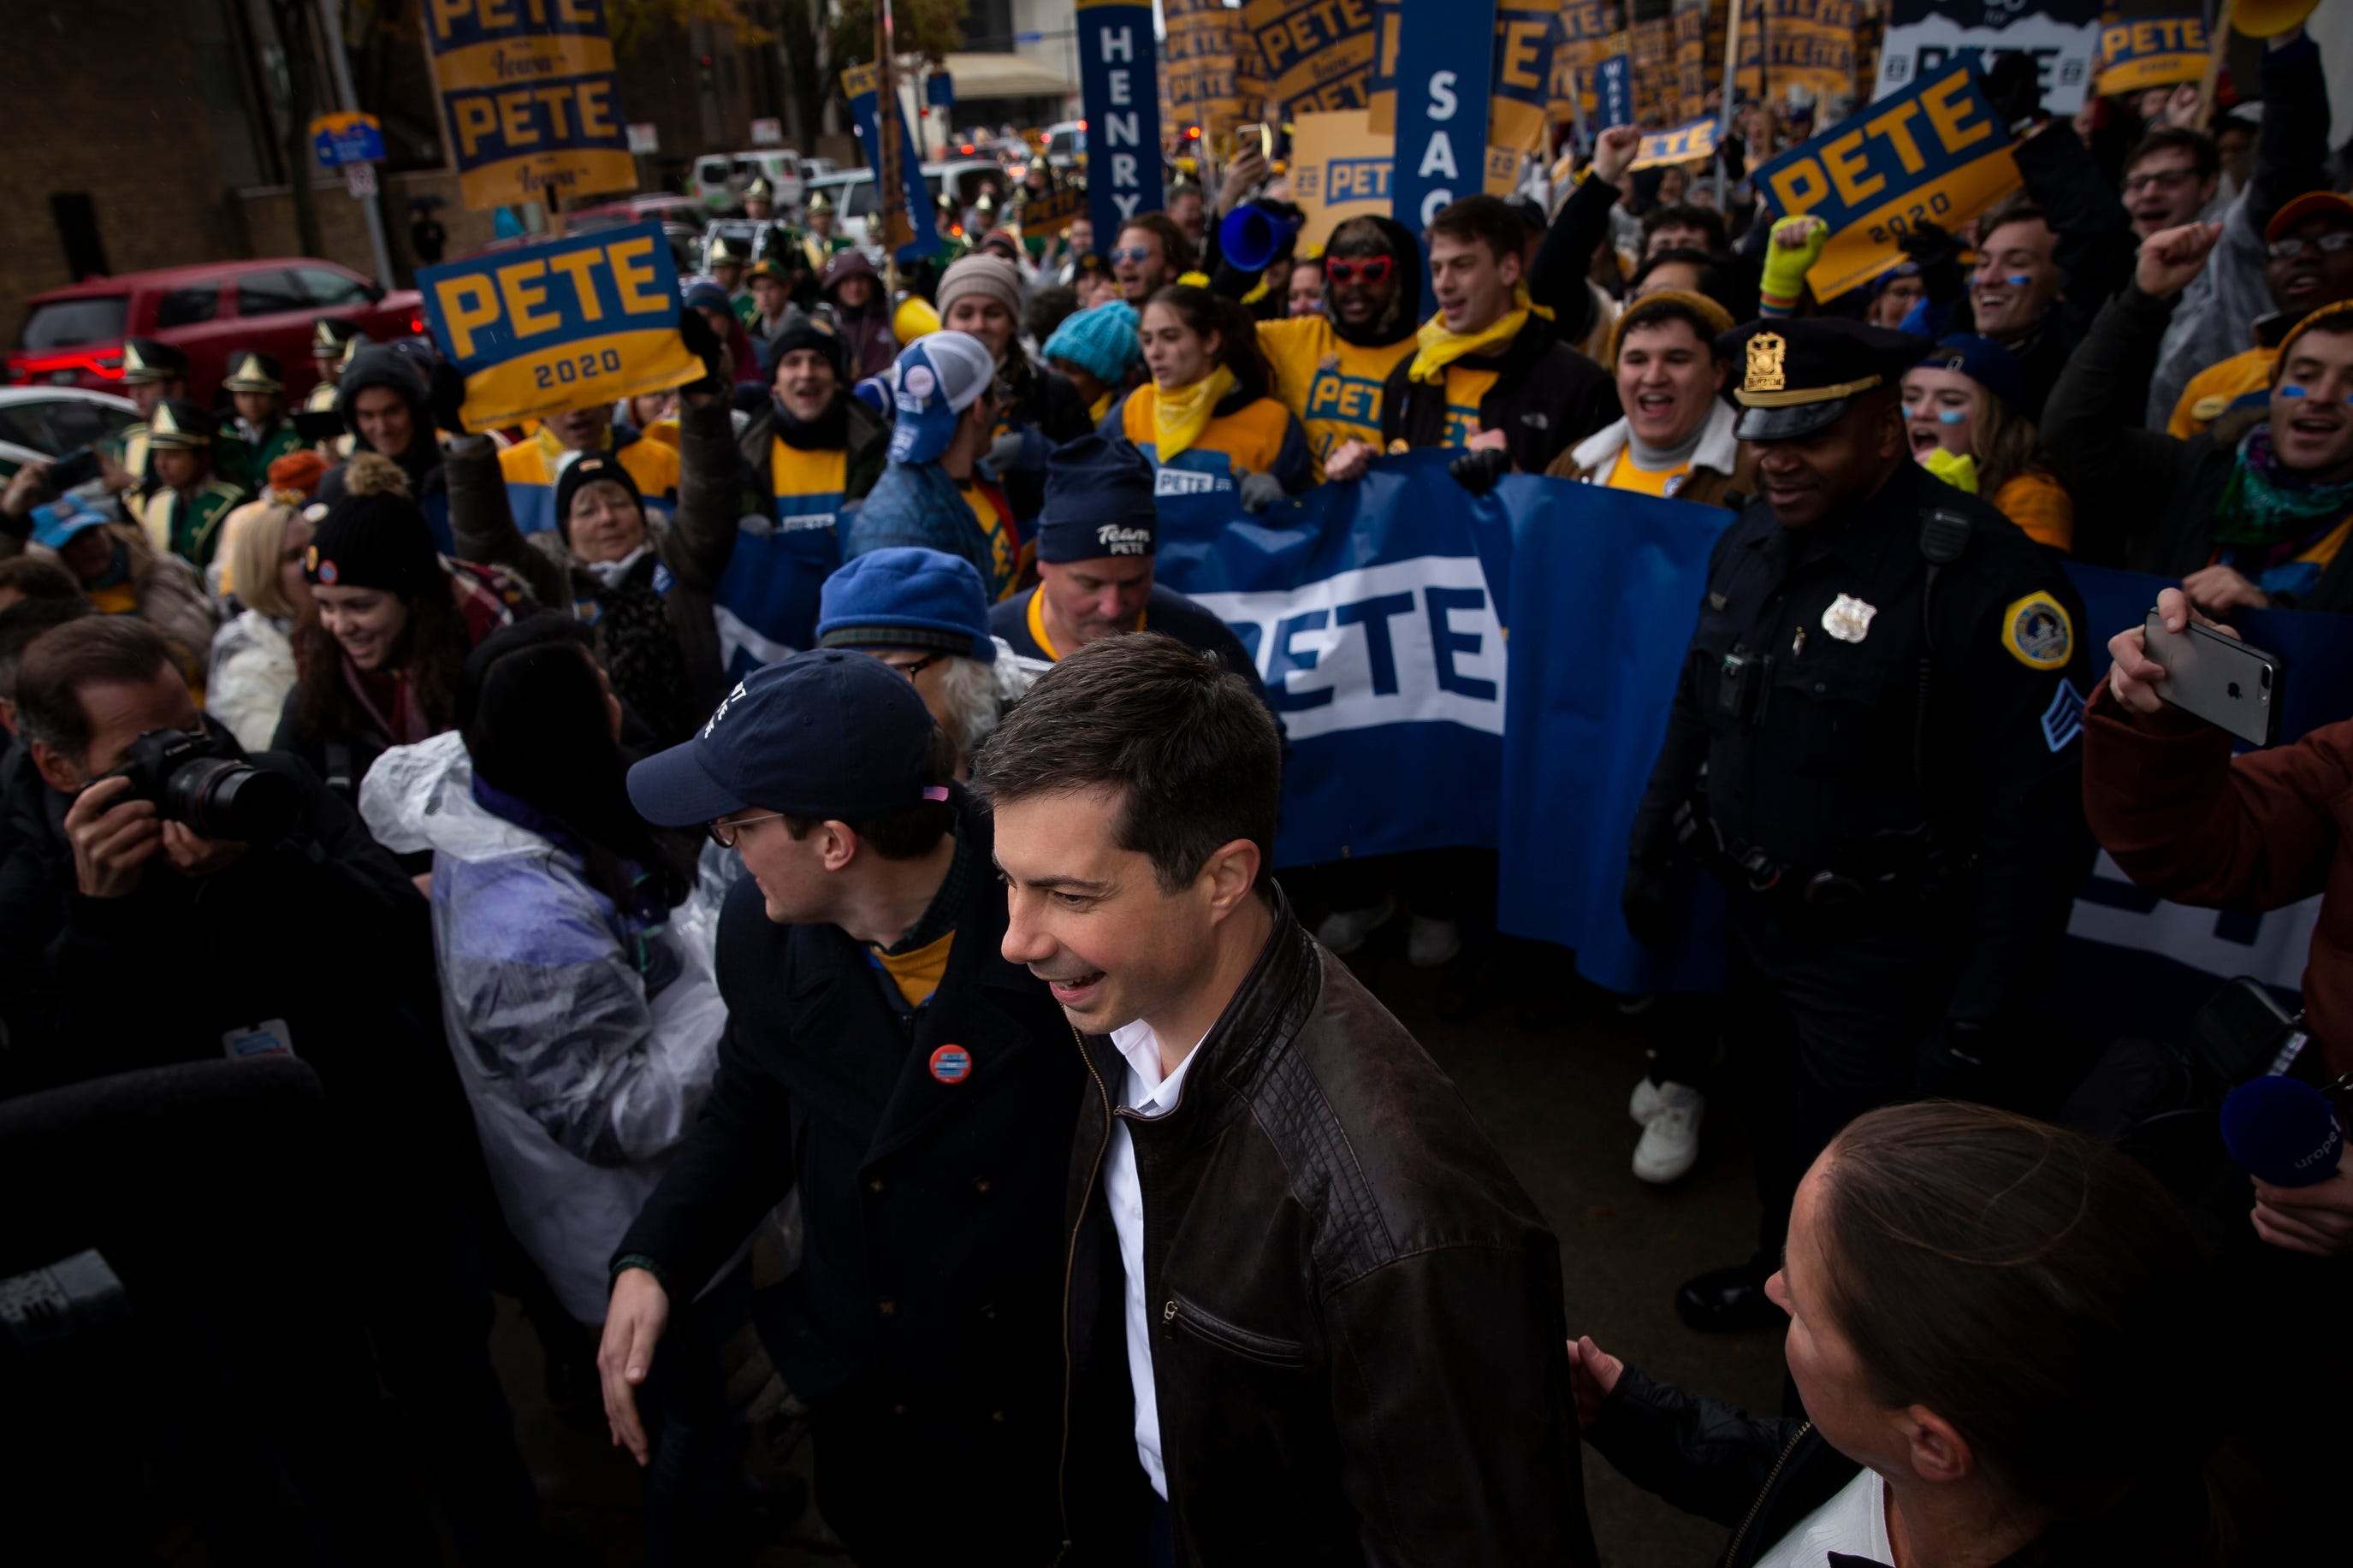 South Bend Indiana Mayor and 2020 Democratic presidential candidate Pete Buttigieg marches with supporters before the Iowa Democratic Party's 2019 Liberty and Justice Dinner on Friday, Nov. 1, 2019 in Des Moines.